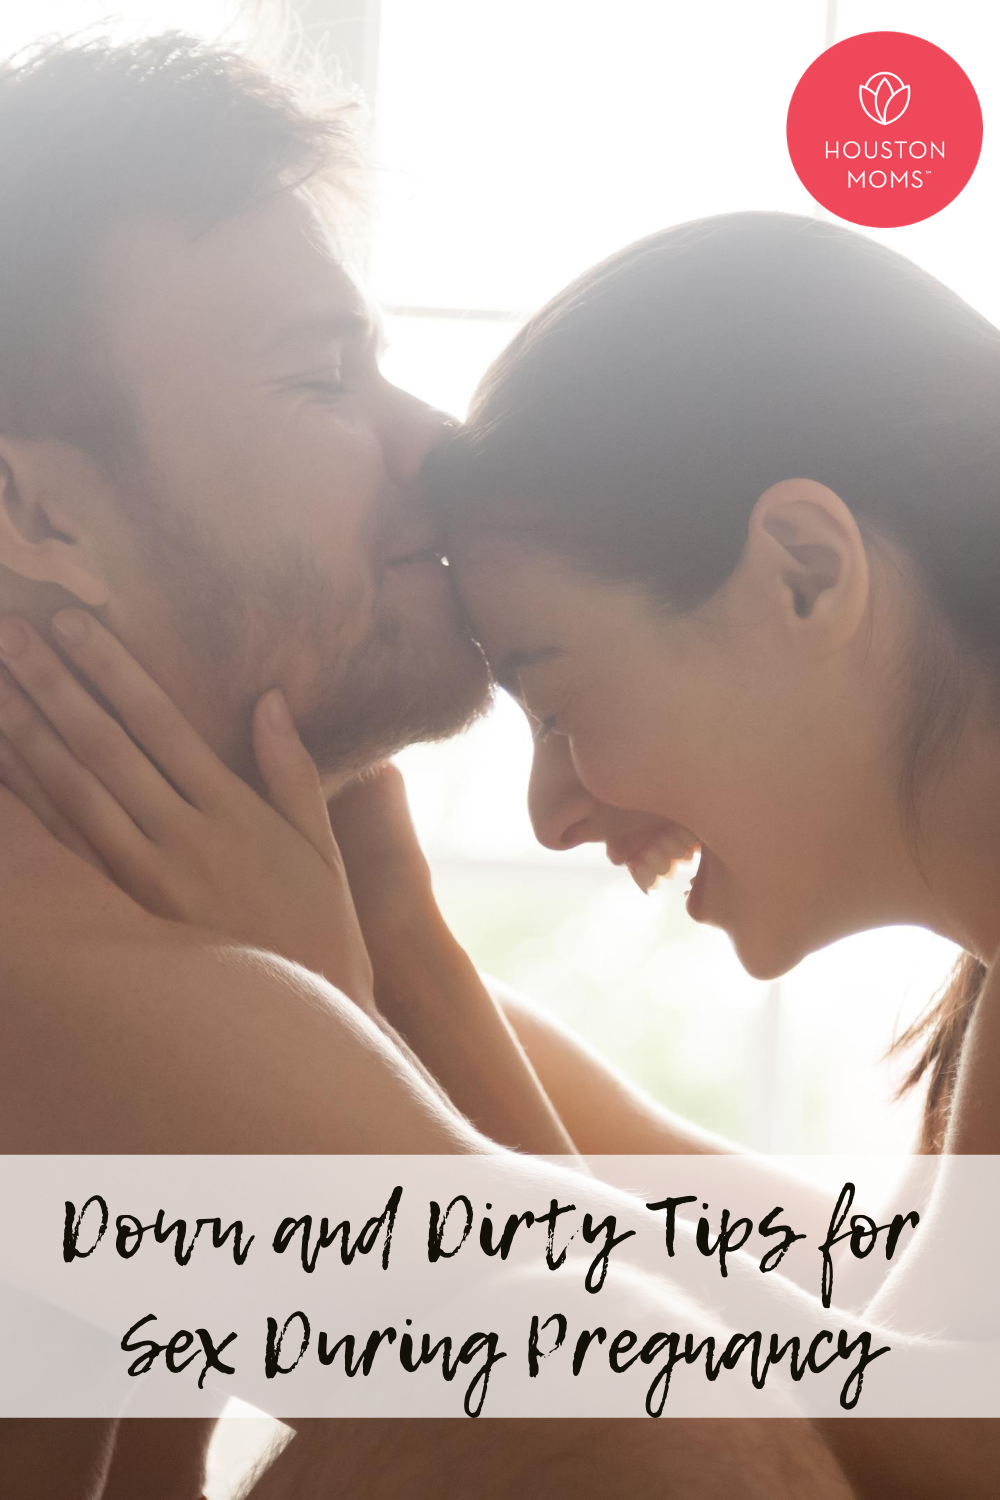 Down and Dirty Tips for Sex during pregnancy. Logo: Houston moms. A photograph of a smiling woman and man embracing each other. 